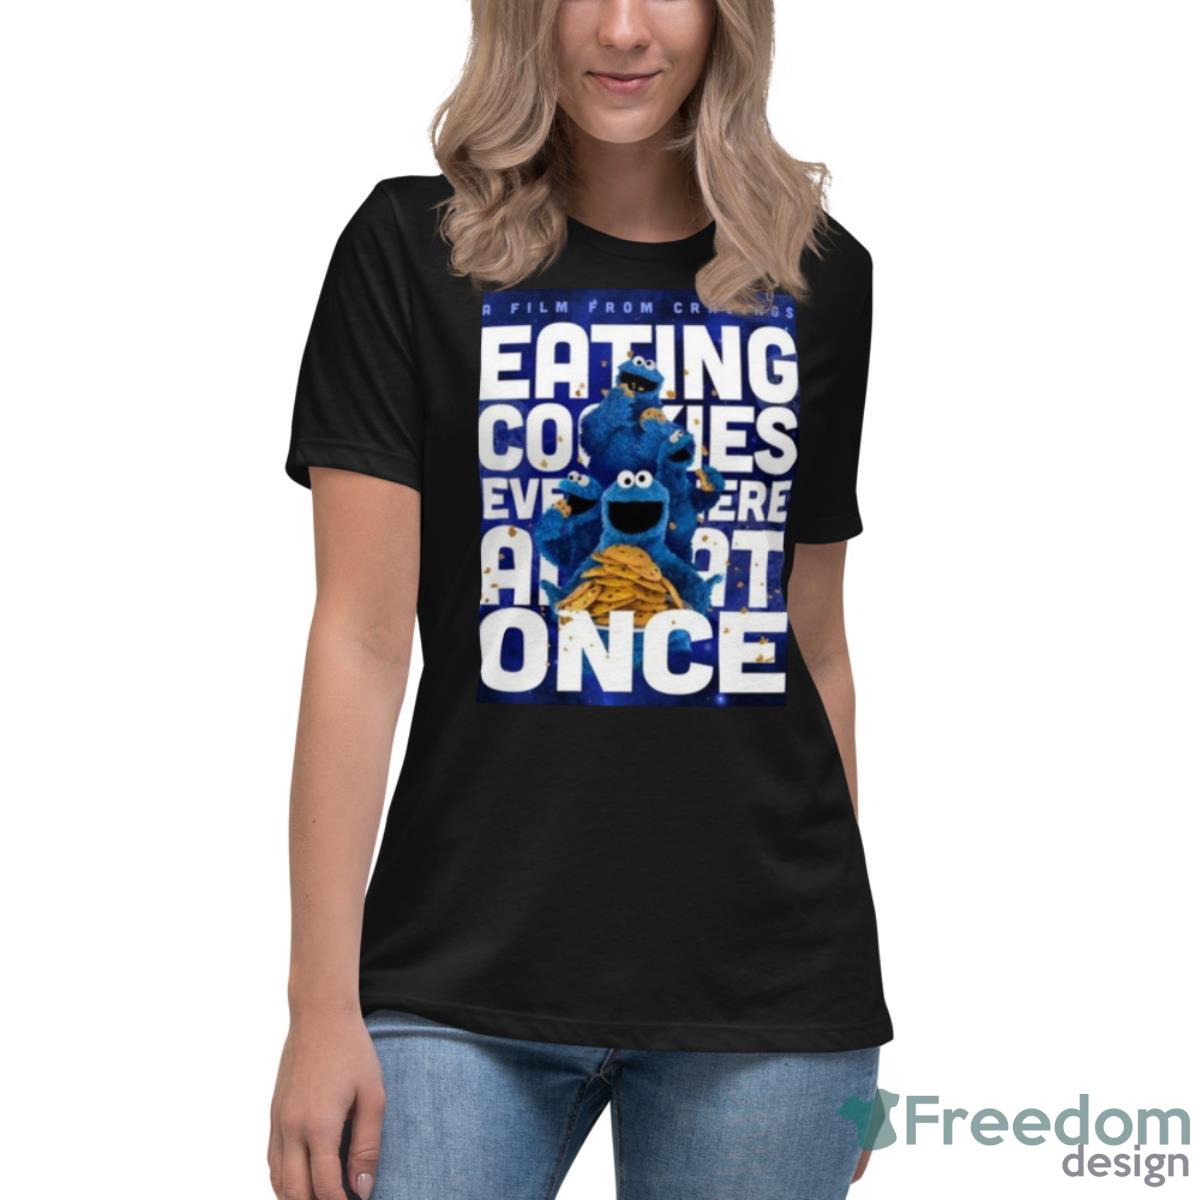 A Film From Cravings Eating Cookies Everywhere AAt Once Shirt